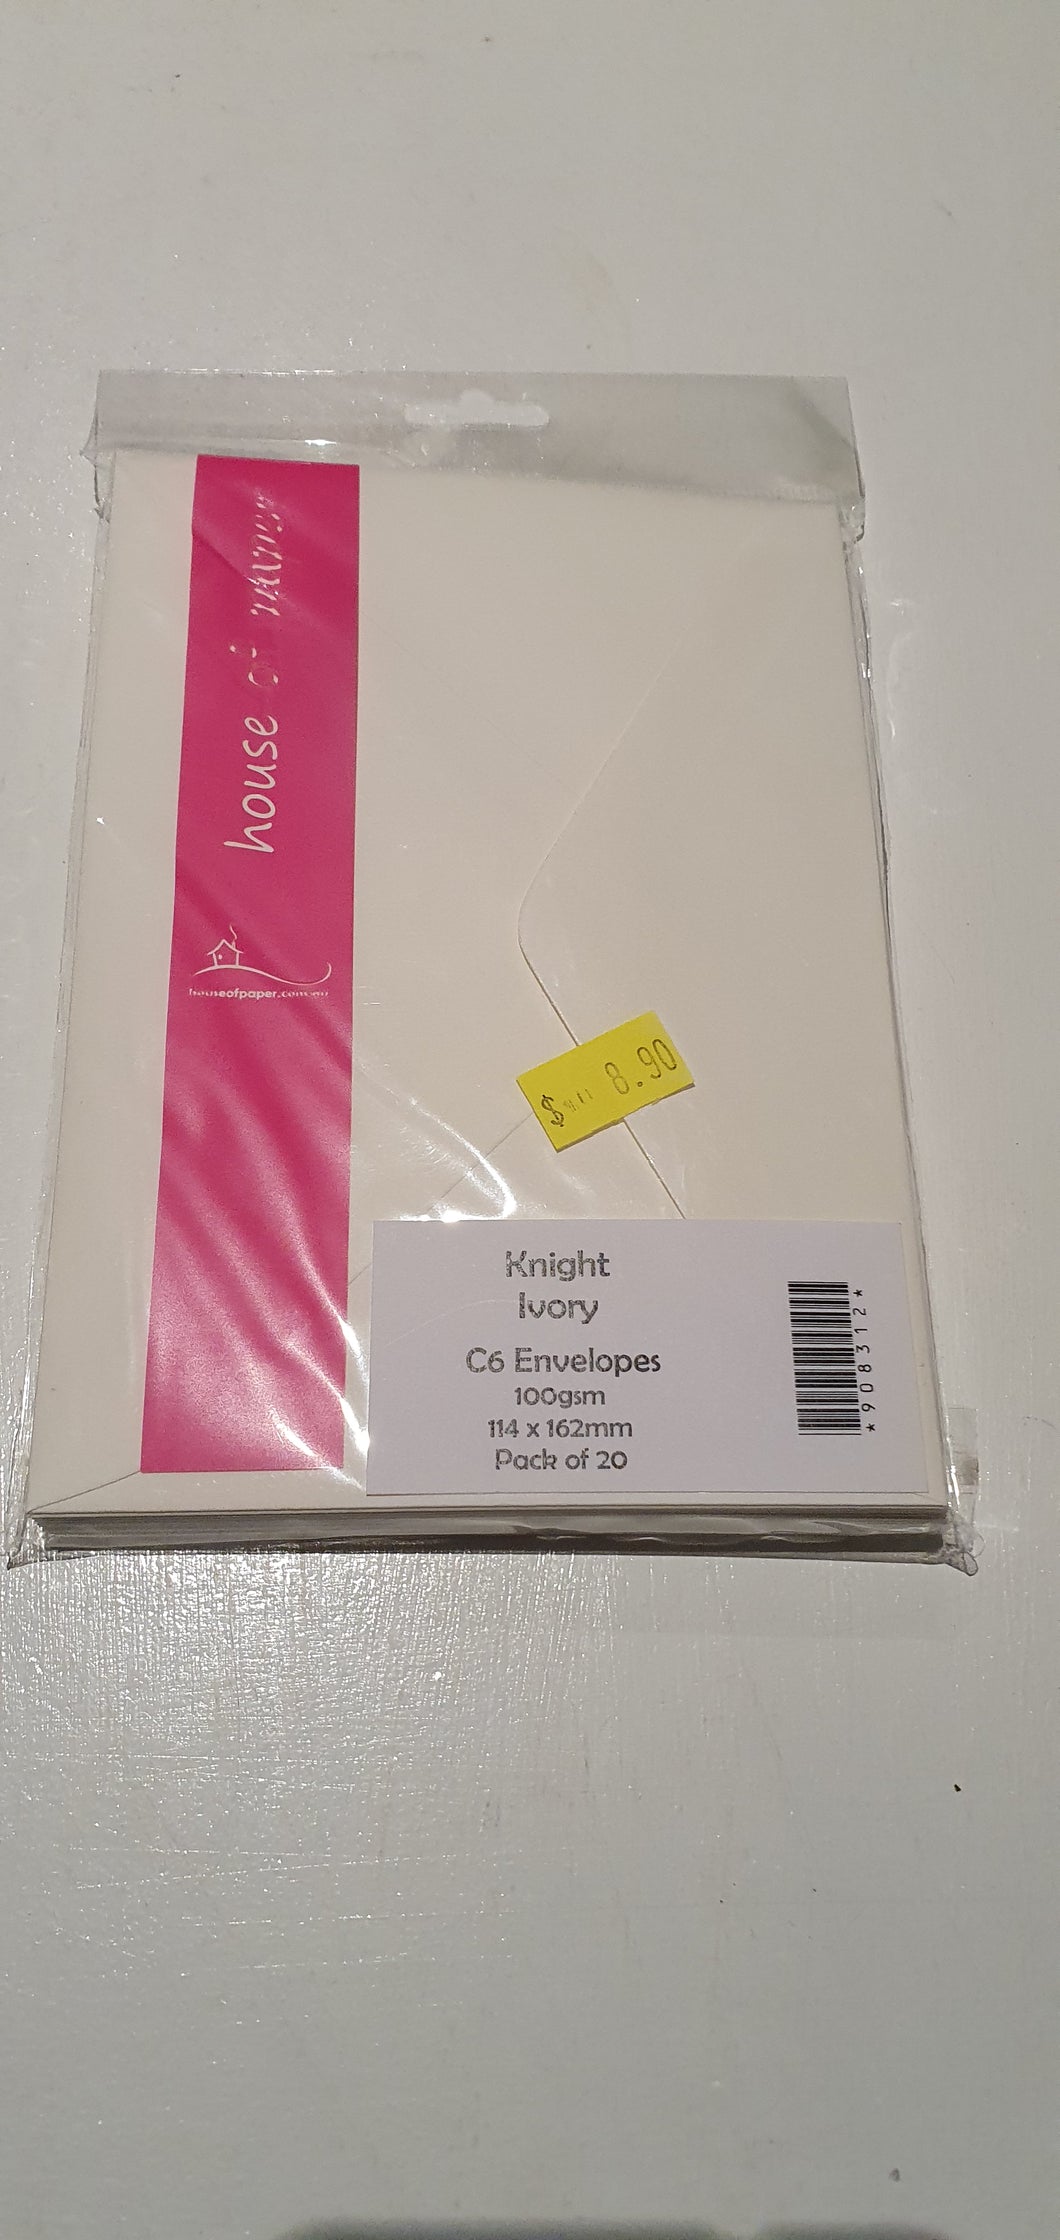 Envelopes Knight Ivory C6 - 114 x 162mm House of paper 20 pack